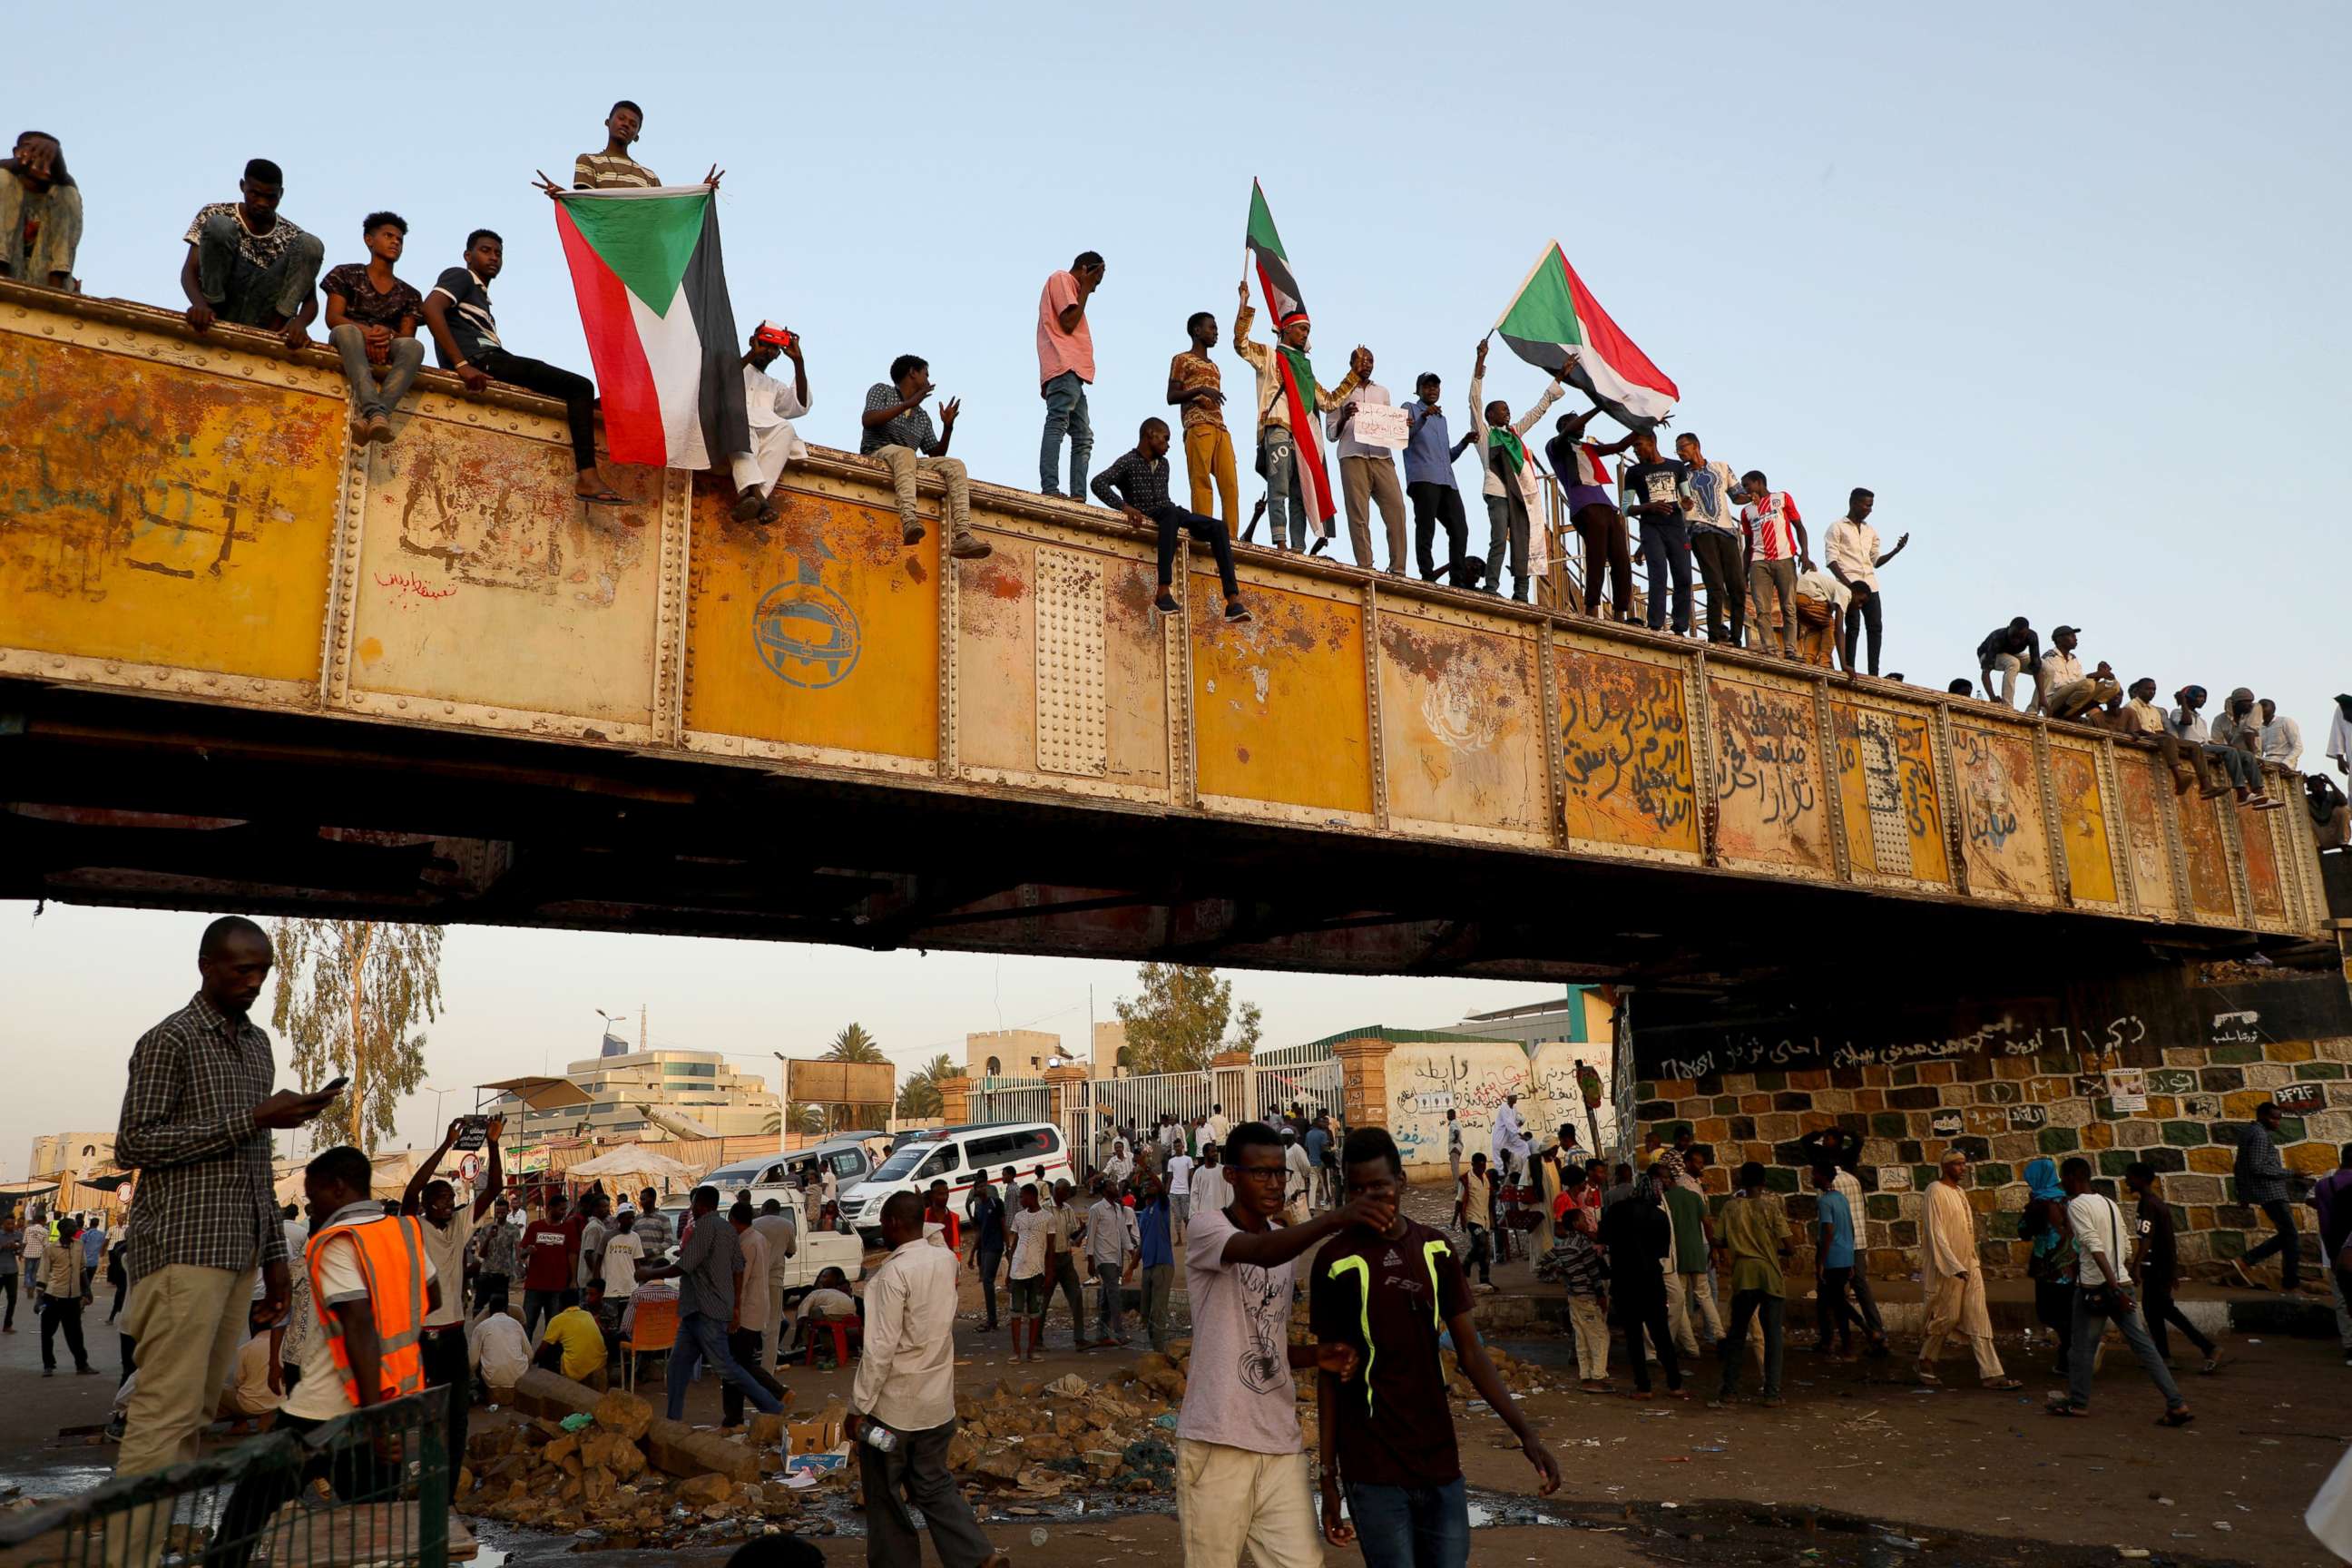 PHOTO: Sudanese demonstrators attend the ongoing protests demanding a civilian transition government in front of military headquarters, on the first day of holy month of Ramadan in Khartoum, Sudan, on May 06, 2019.